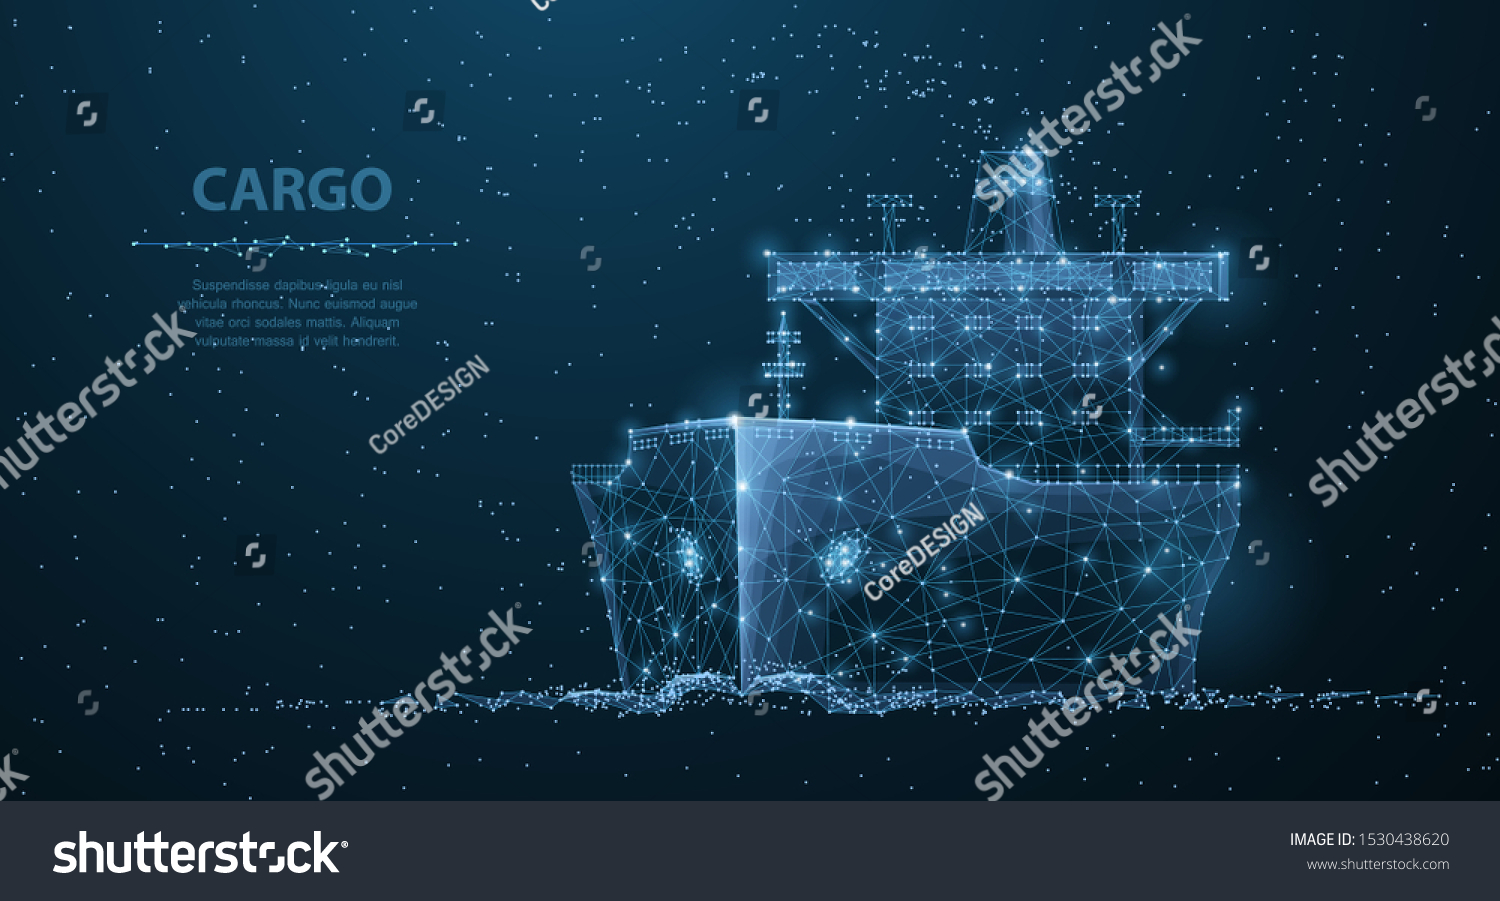 SVG of Worldwide cargo ship. Polygonal wireframe mesh art looks like constellation on dark blue night sky with dots and stars. Transportation, logistic, shipping concept illustration or background svg